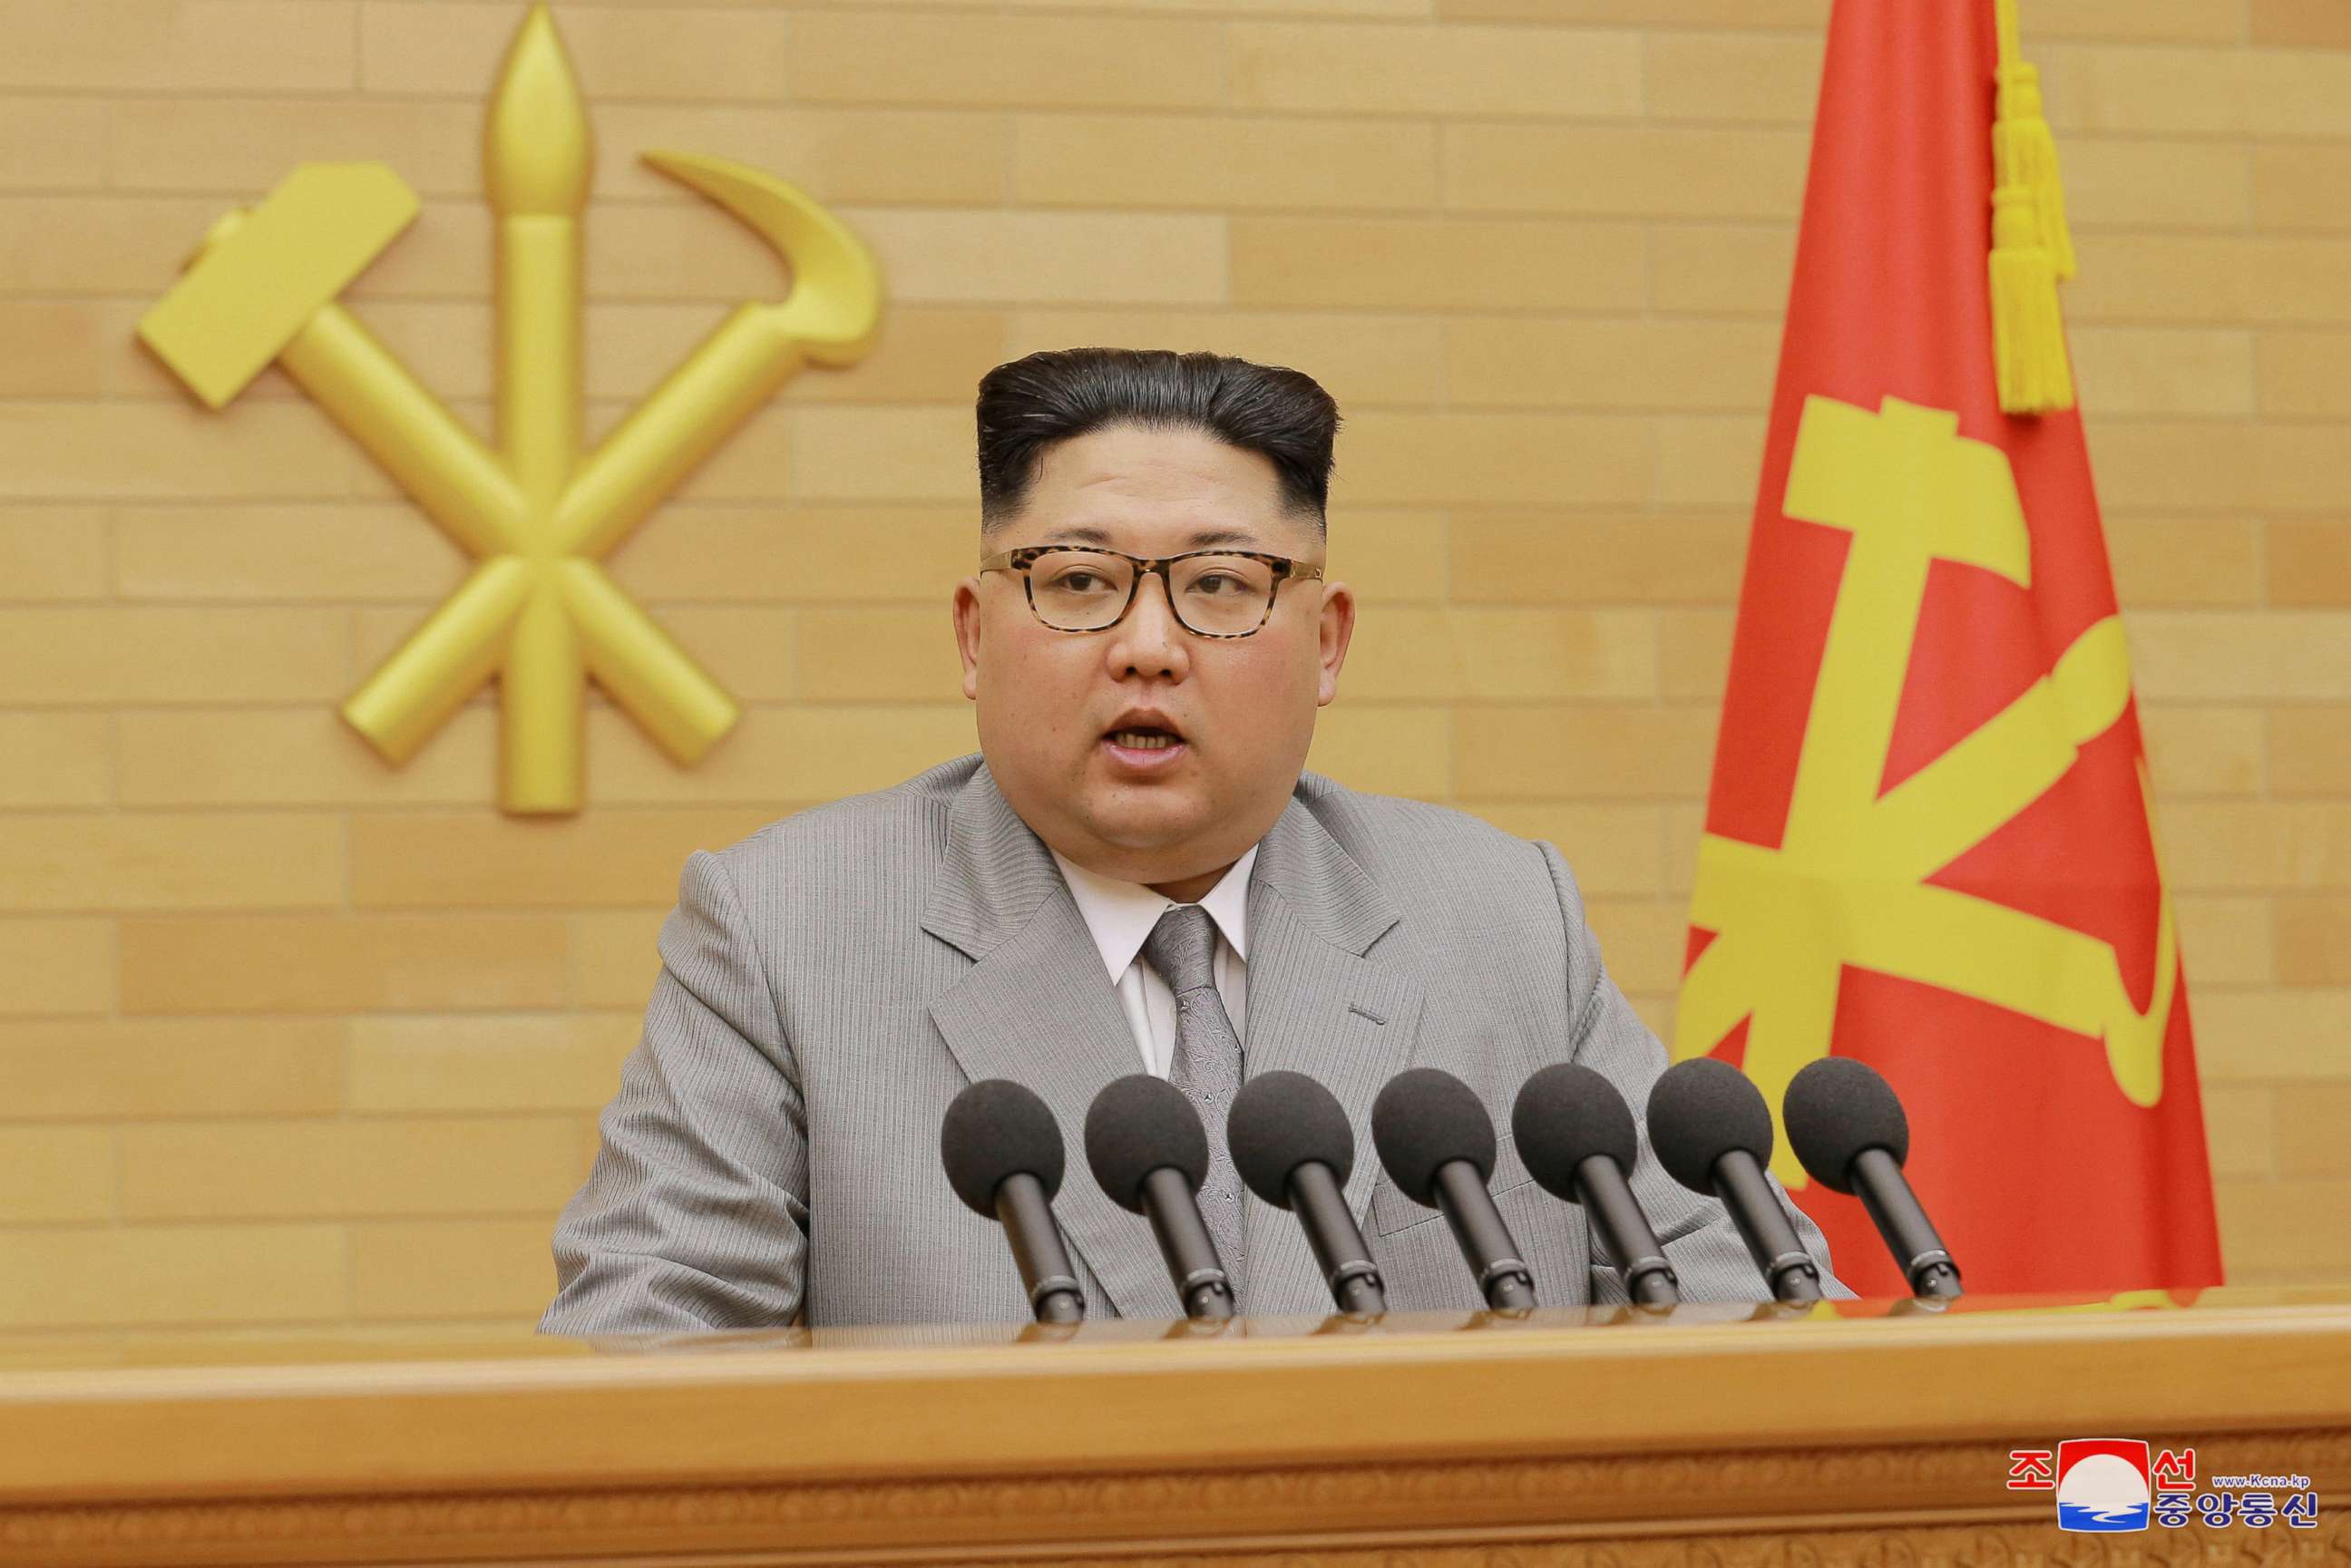 PHOTO: North Korea's leader Kim Jong Un speaks during a New Year's Day speech in this photo released by North Korea's Korean Central News Agency (KCNA) in Pyongyang, Jan. 1, 2018.